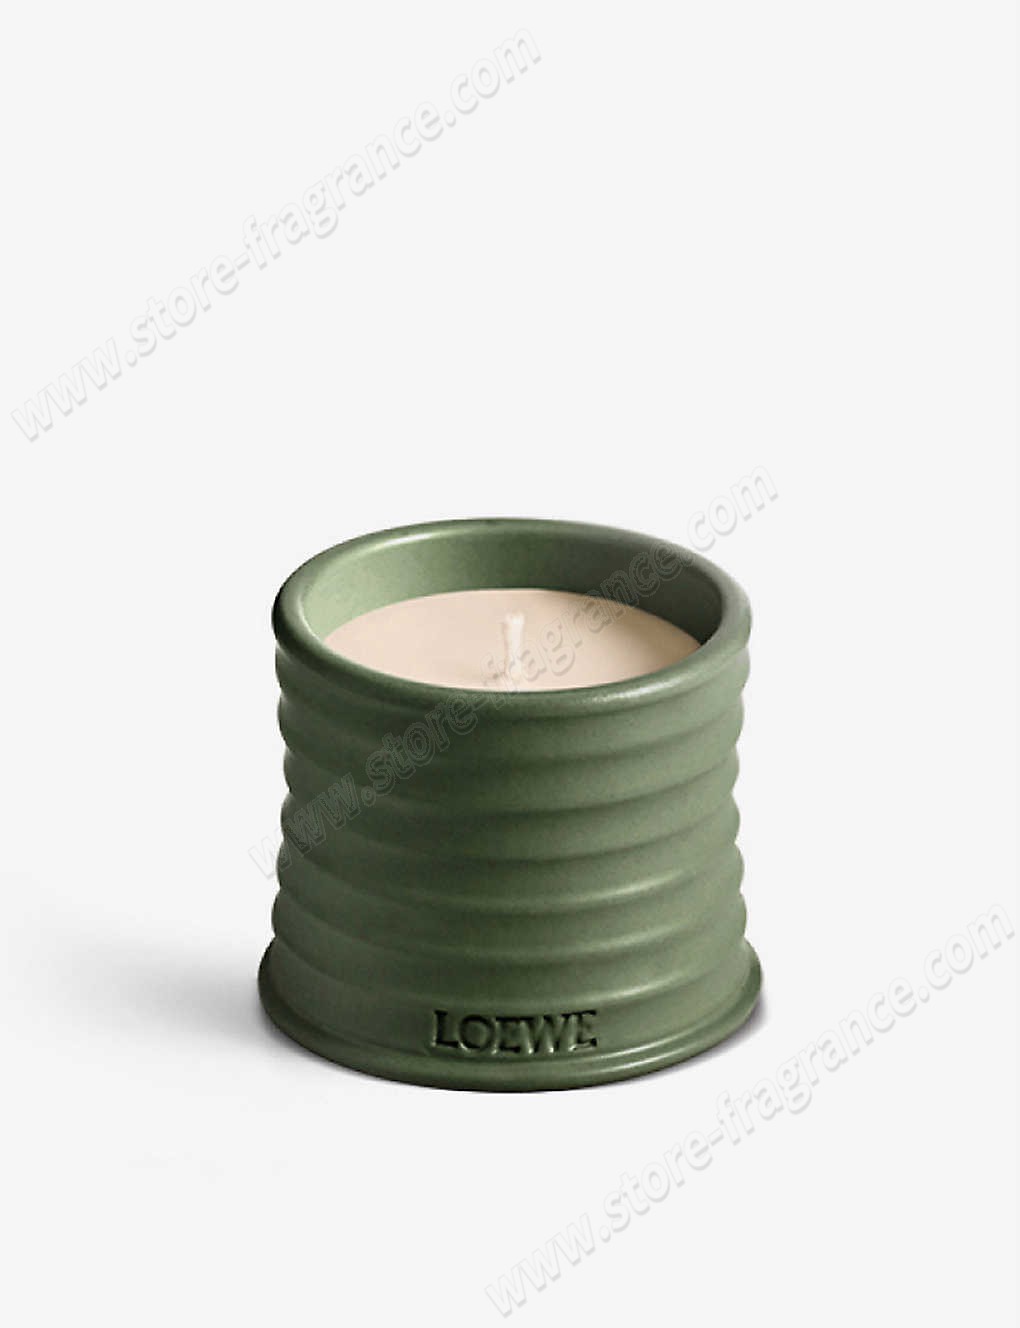 LOEWE/Scent of Marihuana scented candle 170g ✿ Discount Store - LOEWE/Scent of Marihuana scented candle 170g ✿ Discount Store